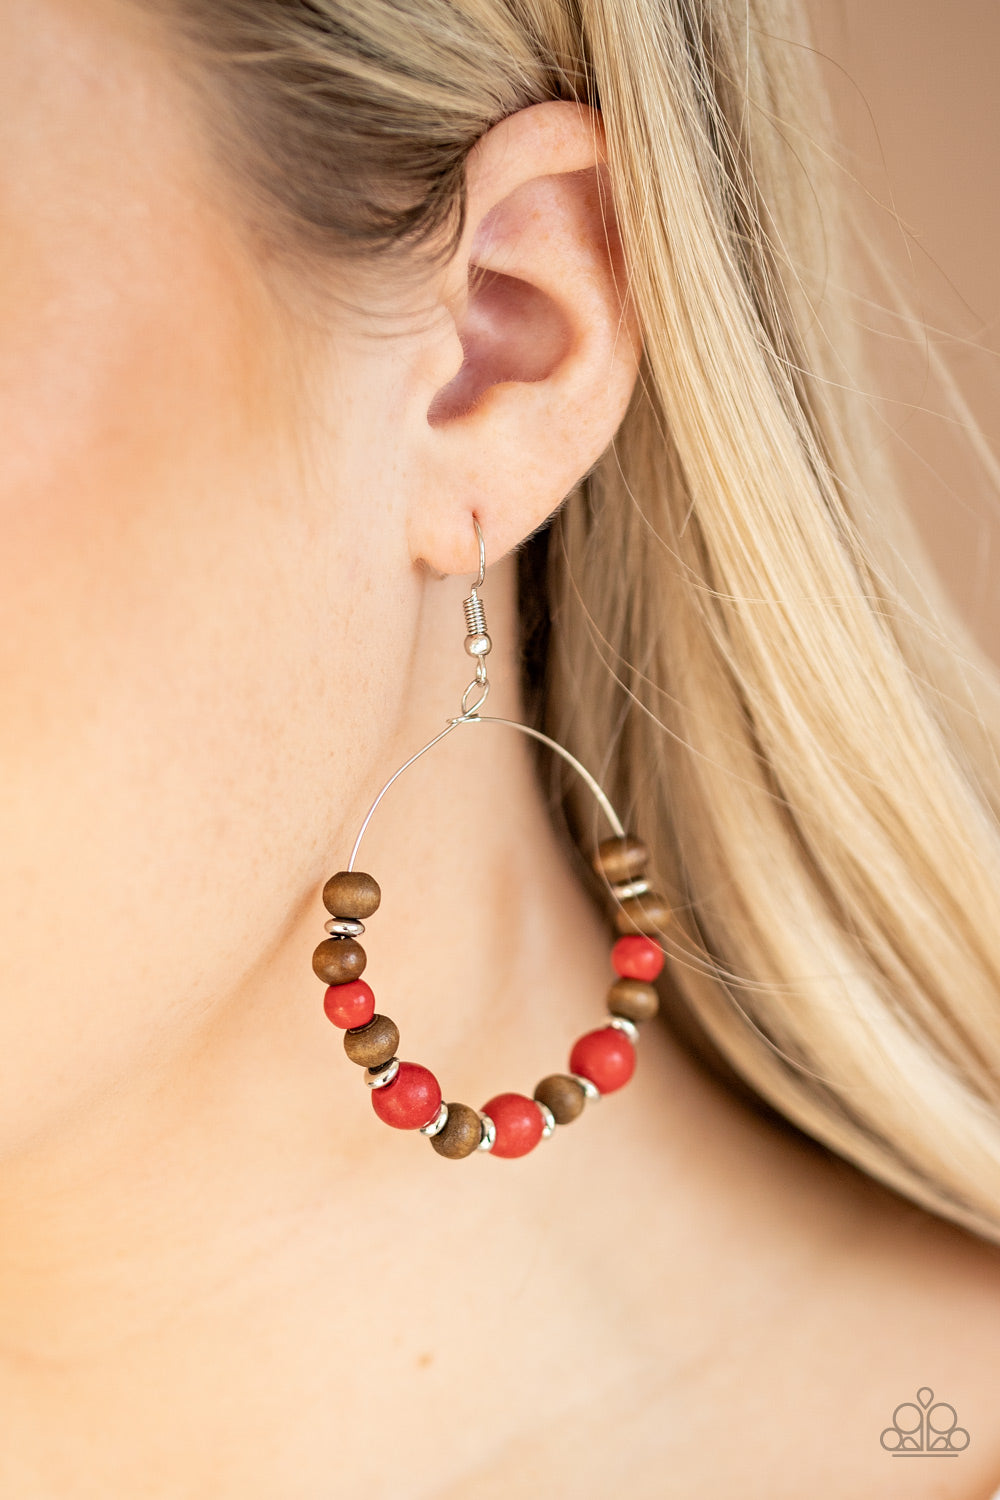 Paparazzi Accessories - Forestry Fashion - Red Earrings